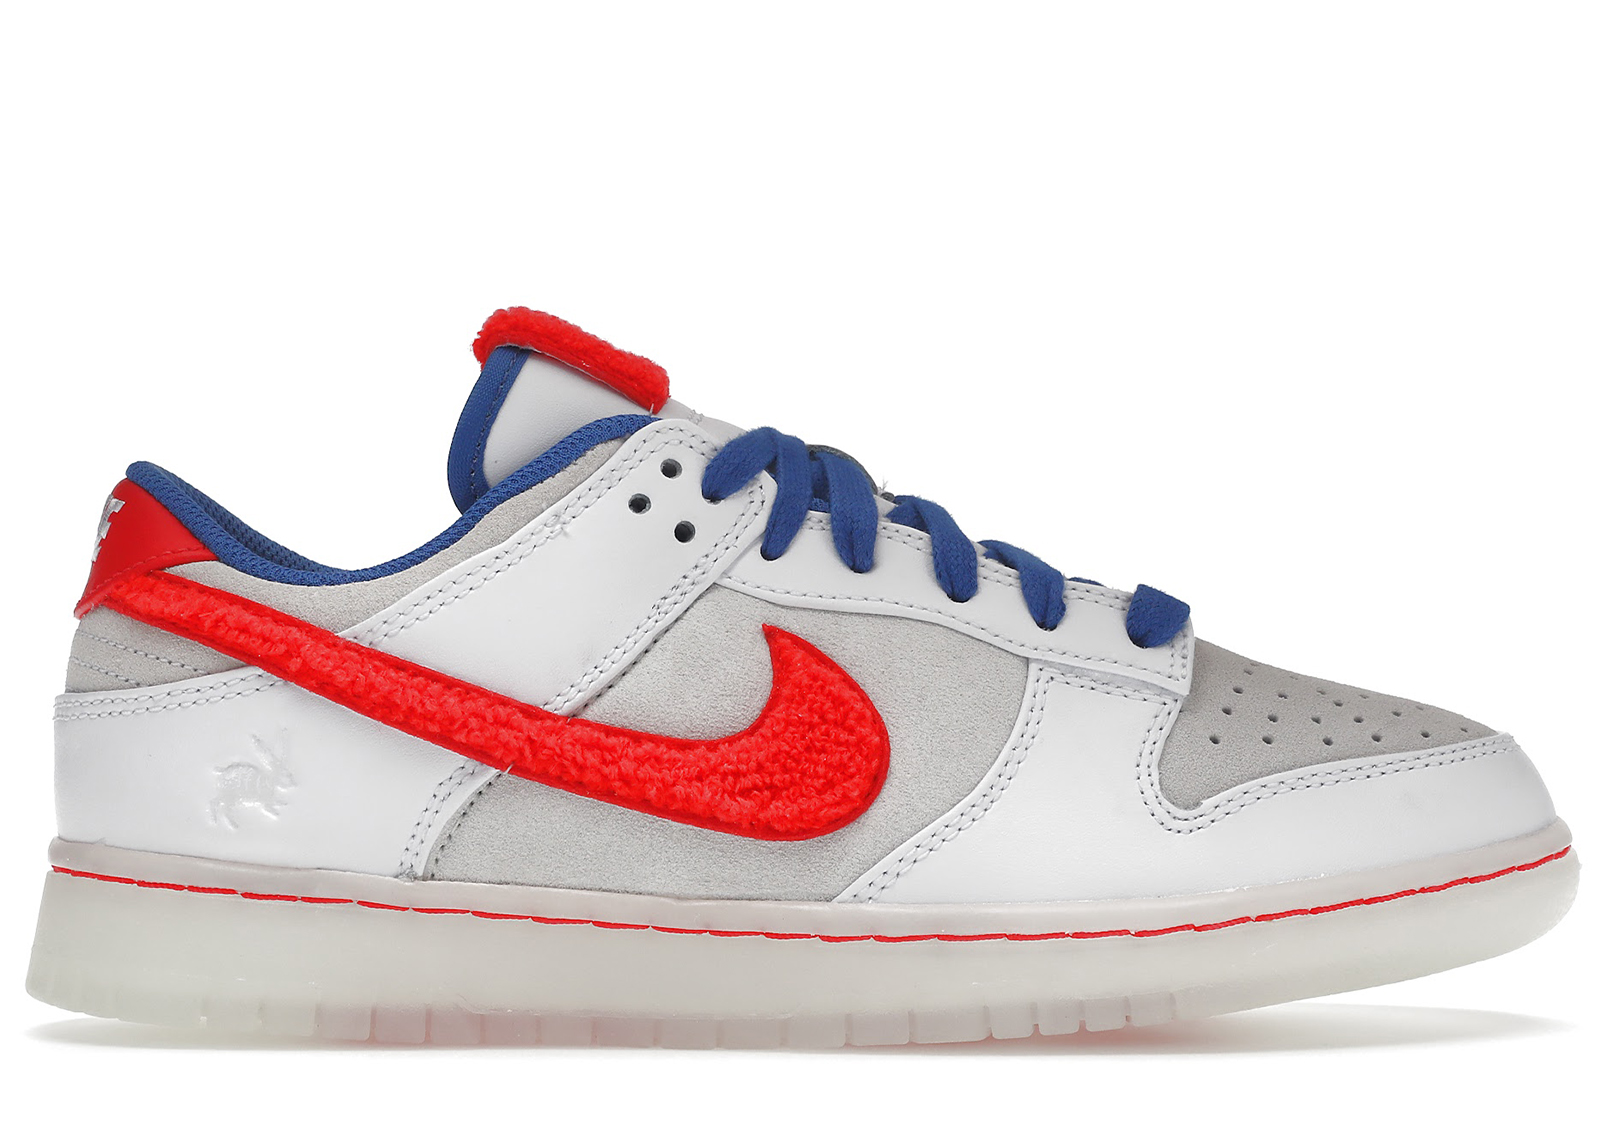 Nike Dunk Low Retro “Year of the Rabbit”